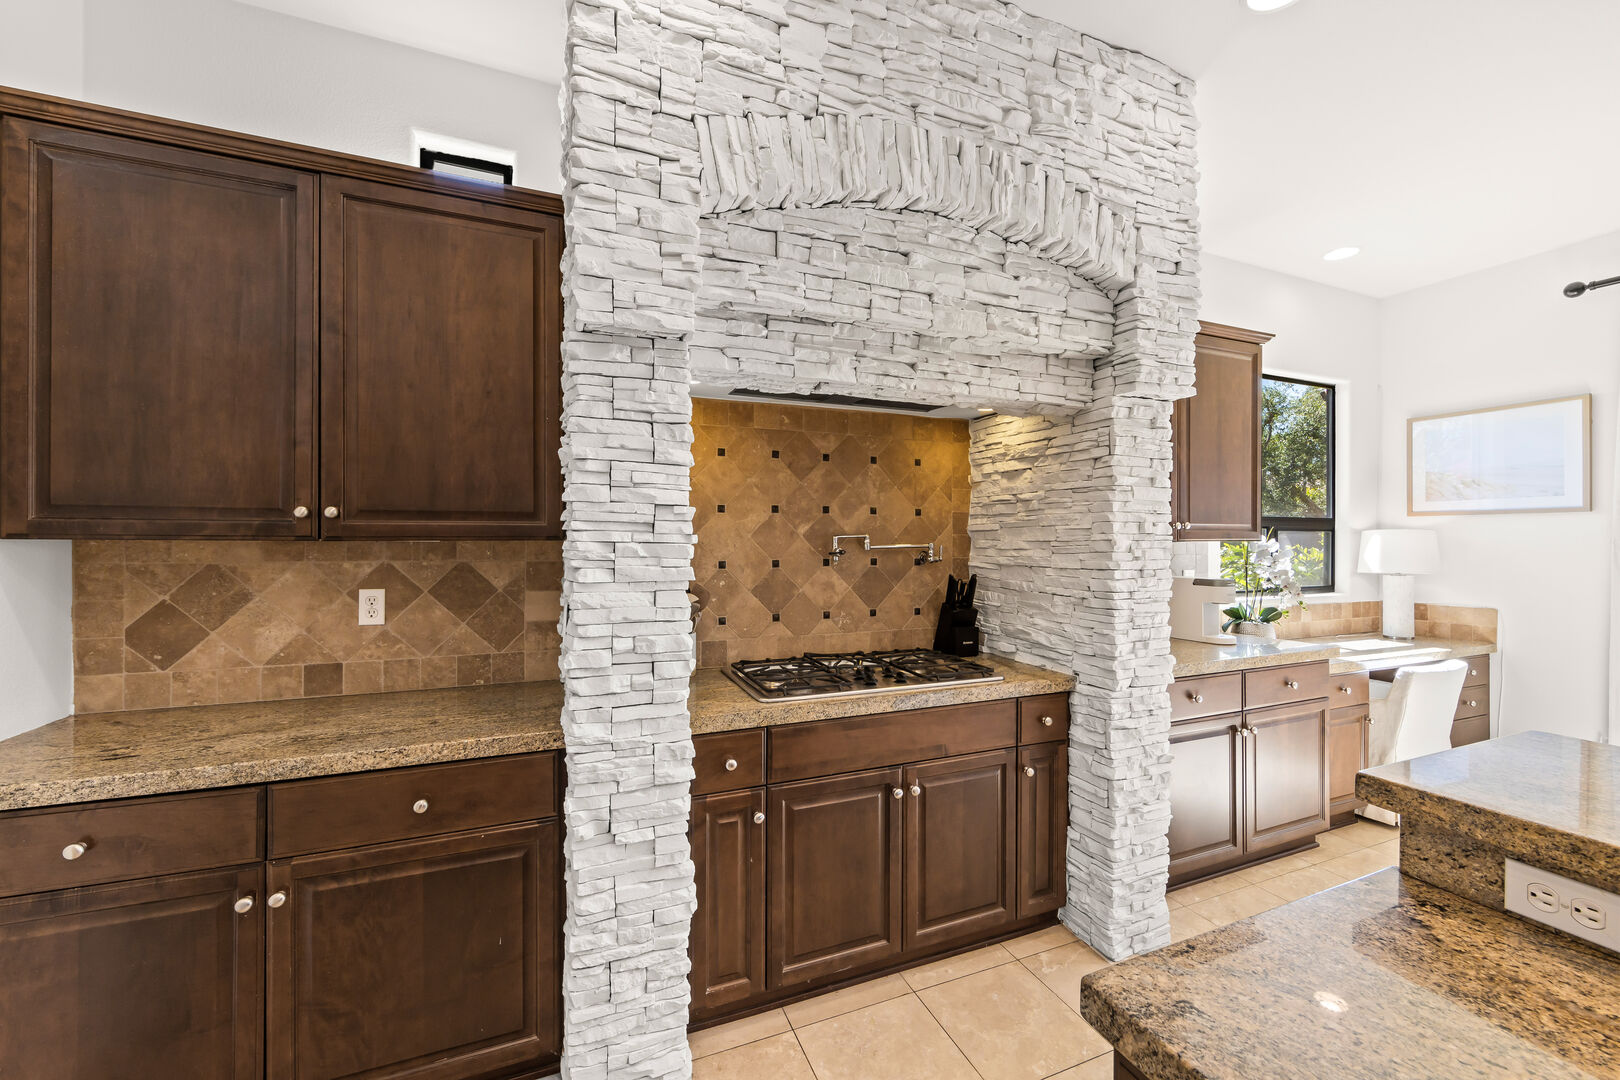 The gourmet kitchen is a chef's dream, boasting a cooktop with 5 burners and a convenient pot filler, all surrounded by exquisite stone to elevate your cooking experience.